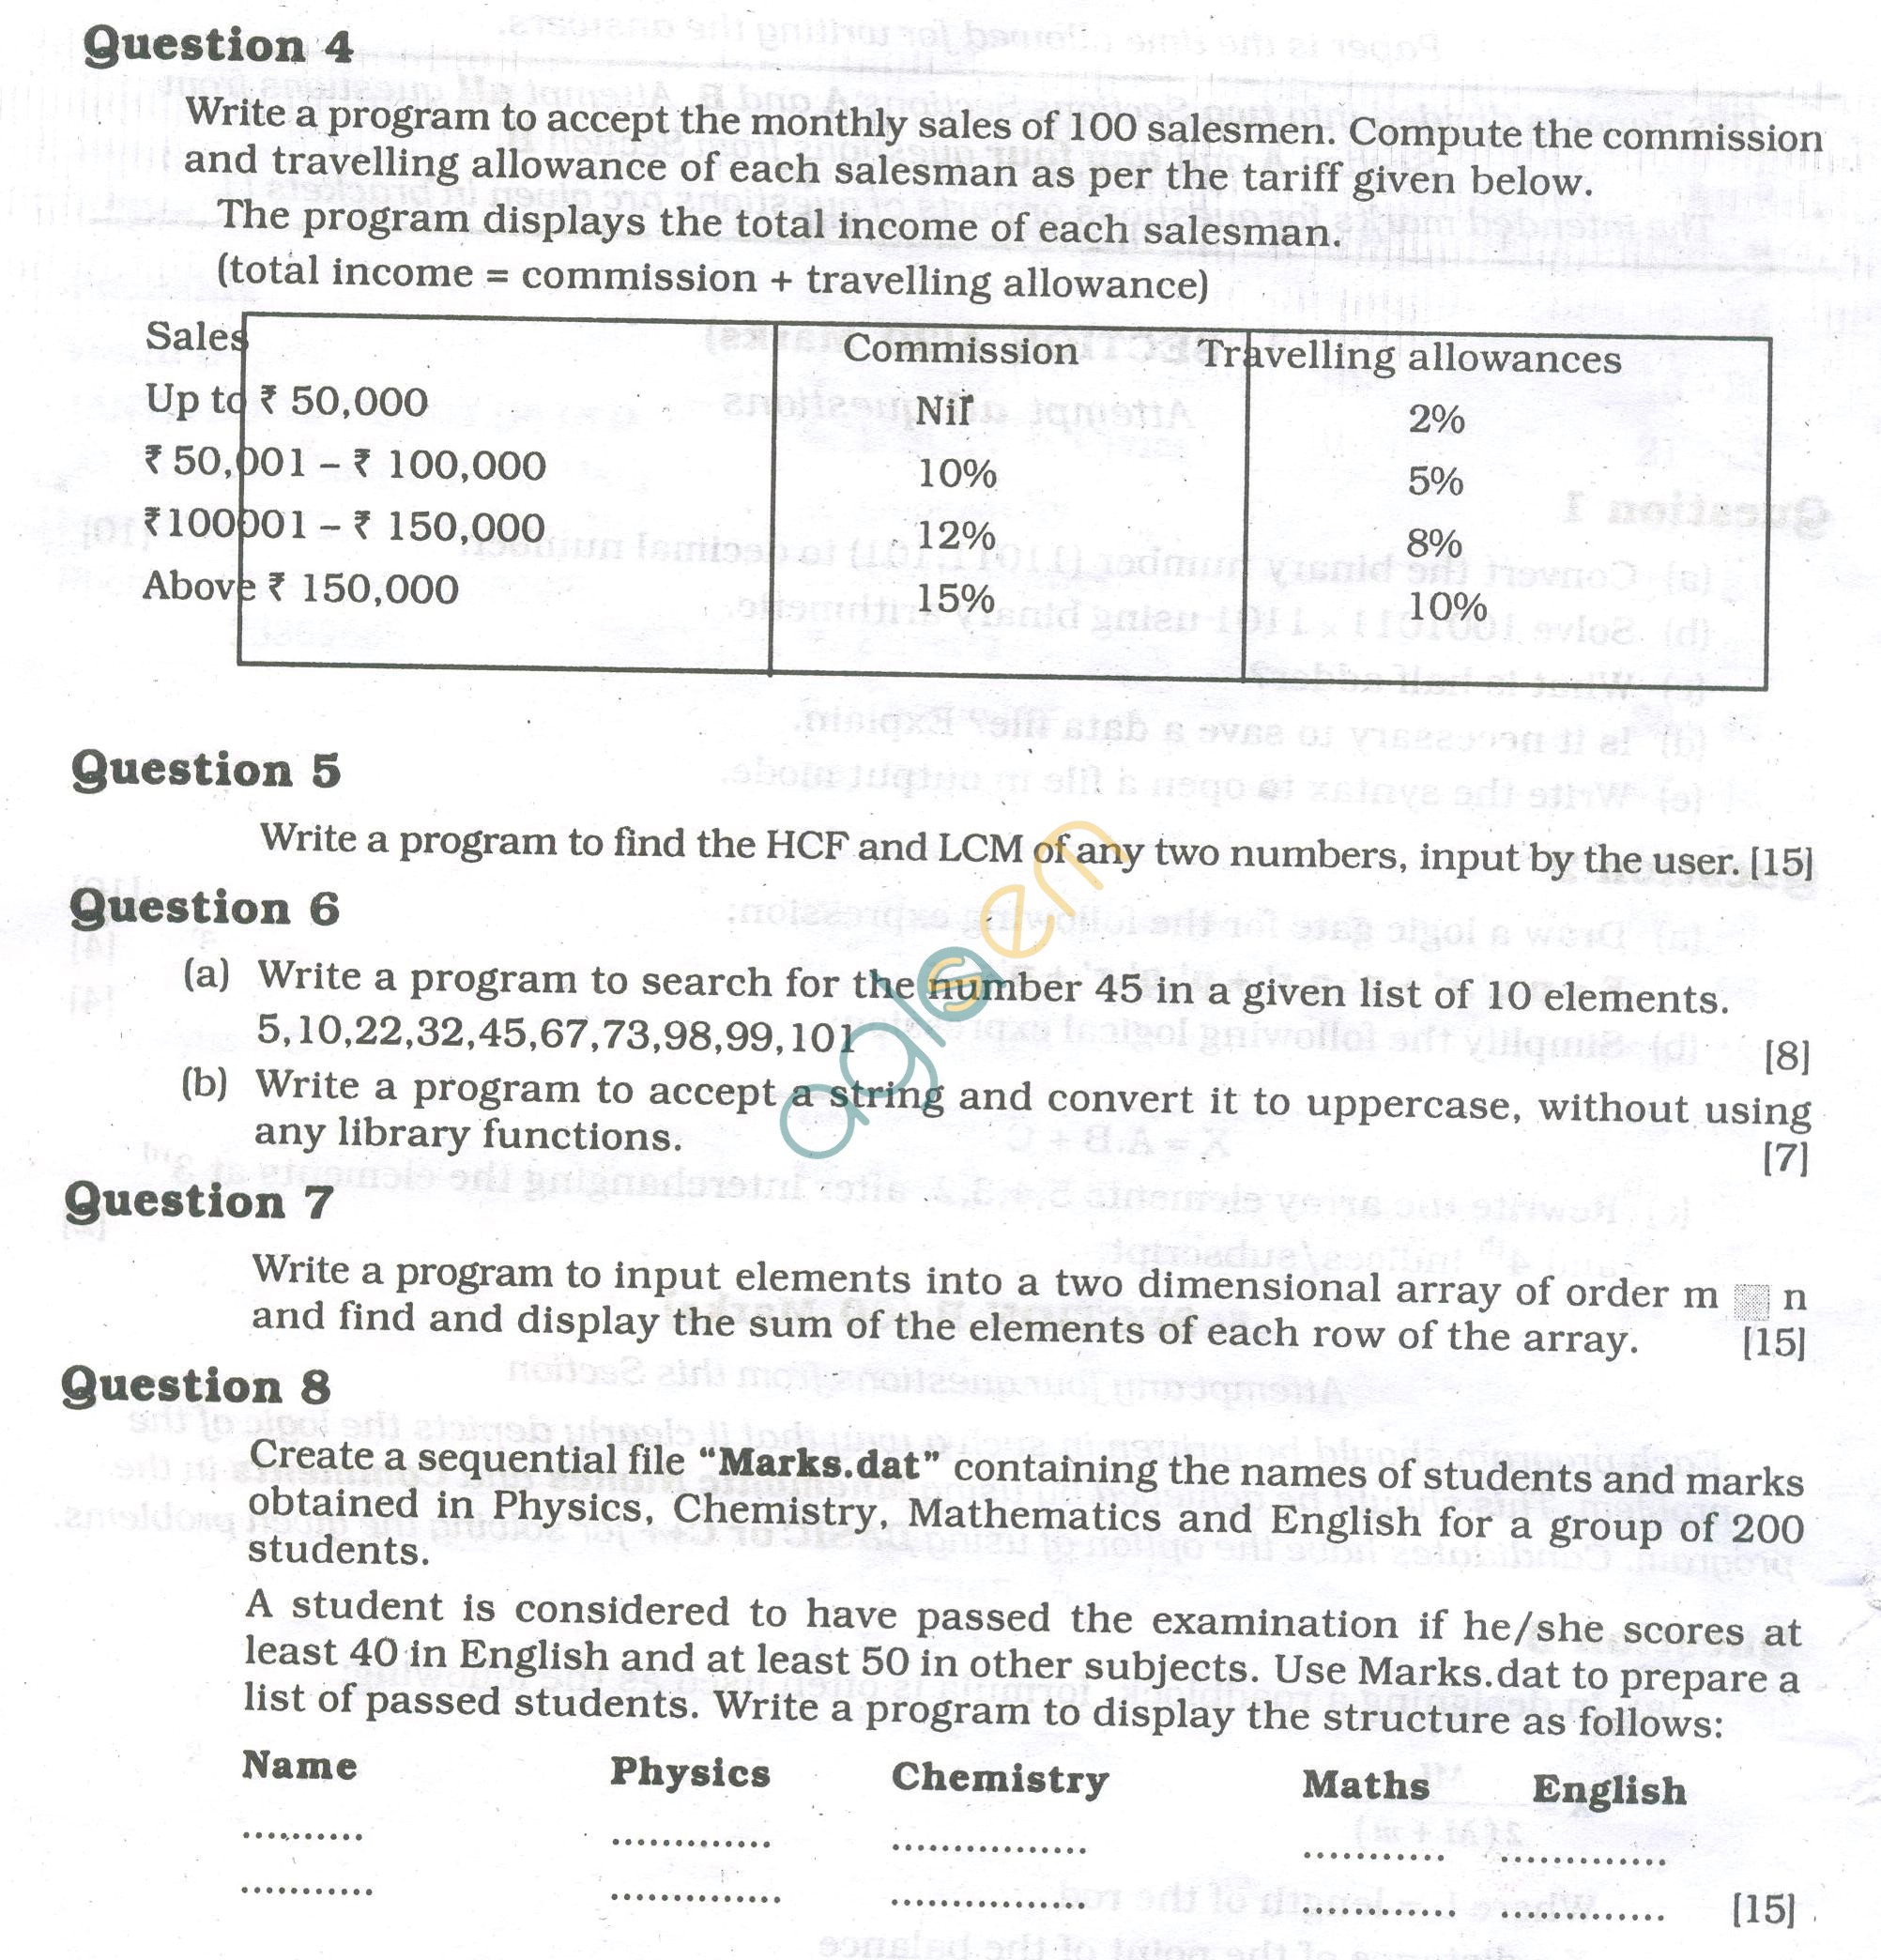 ICSE Question Papers 2013 for Class 10 - Computer Science/